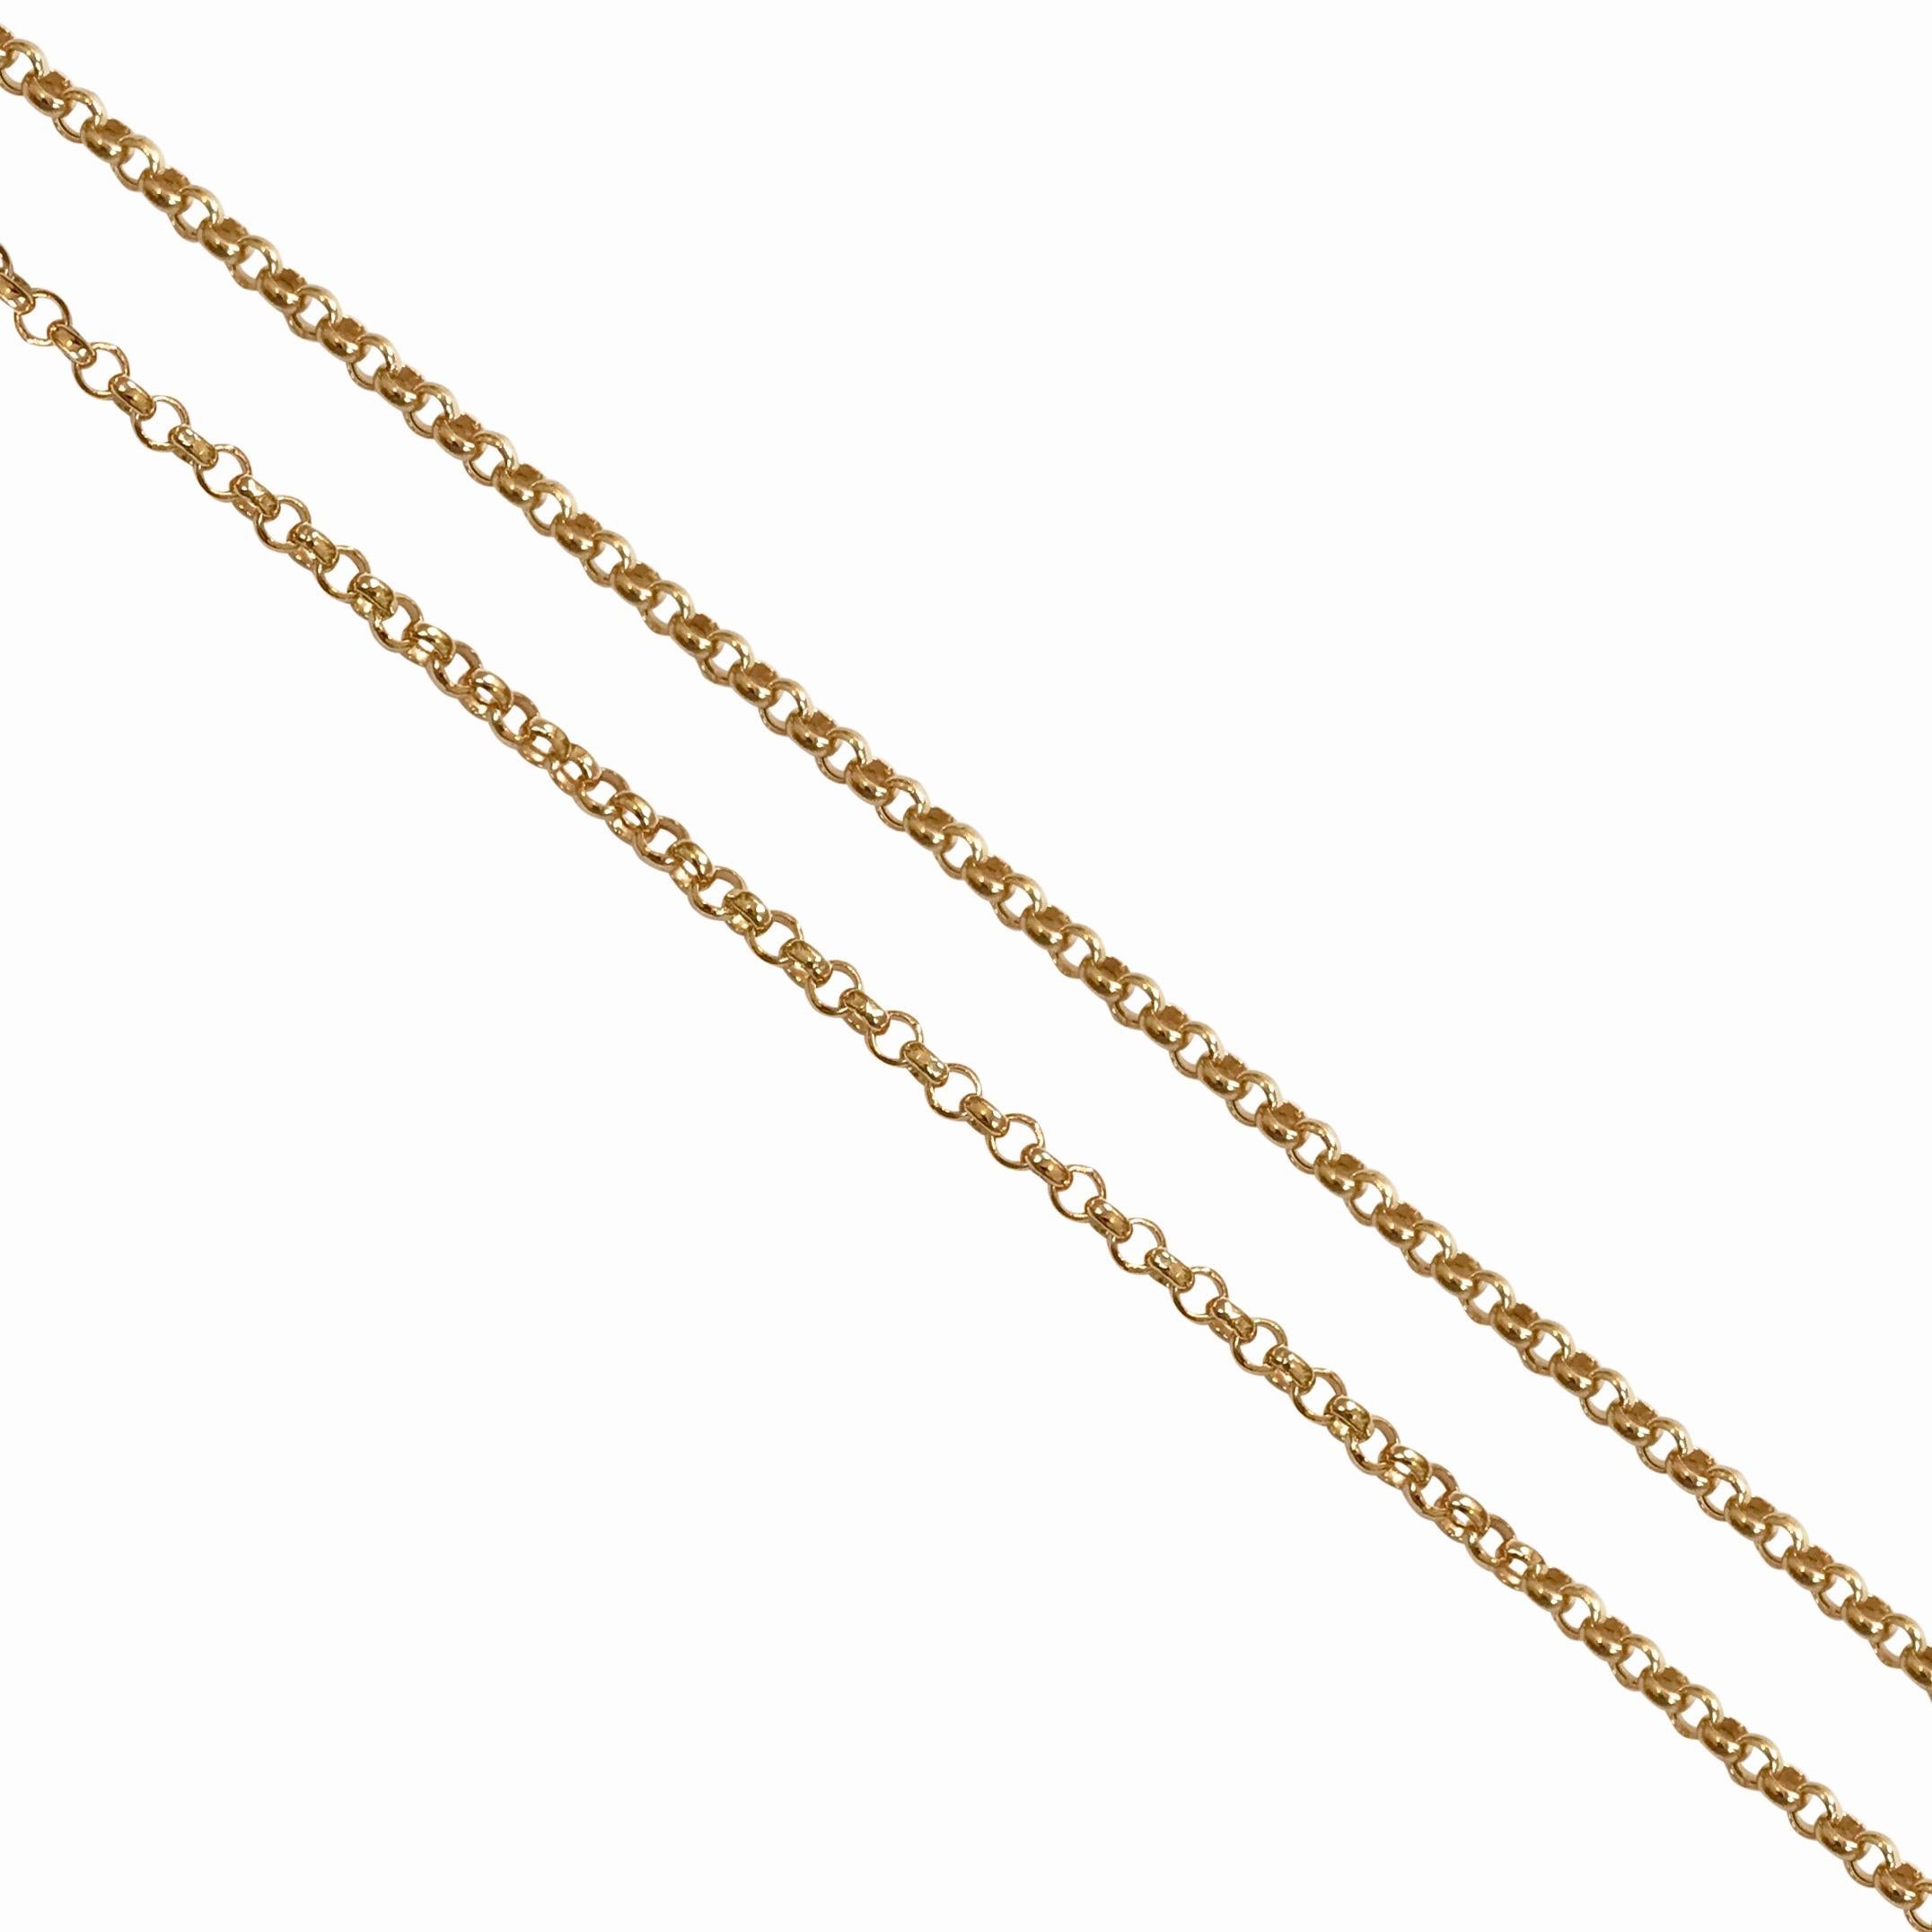 Rollo belcher chain in 18Karat solid yellow gold and a handmade secure clasp.
Hallmark: London Goldsmiths’ Company – Assay Office
Length: 50.00 cm
Gauge:  3.4mm
Weight: 6.85 g  
All our jewellery are new and have never been used.
We are a member of